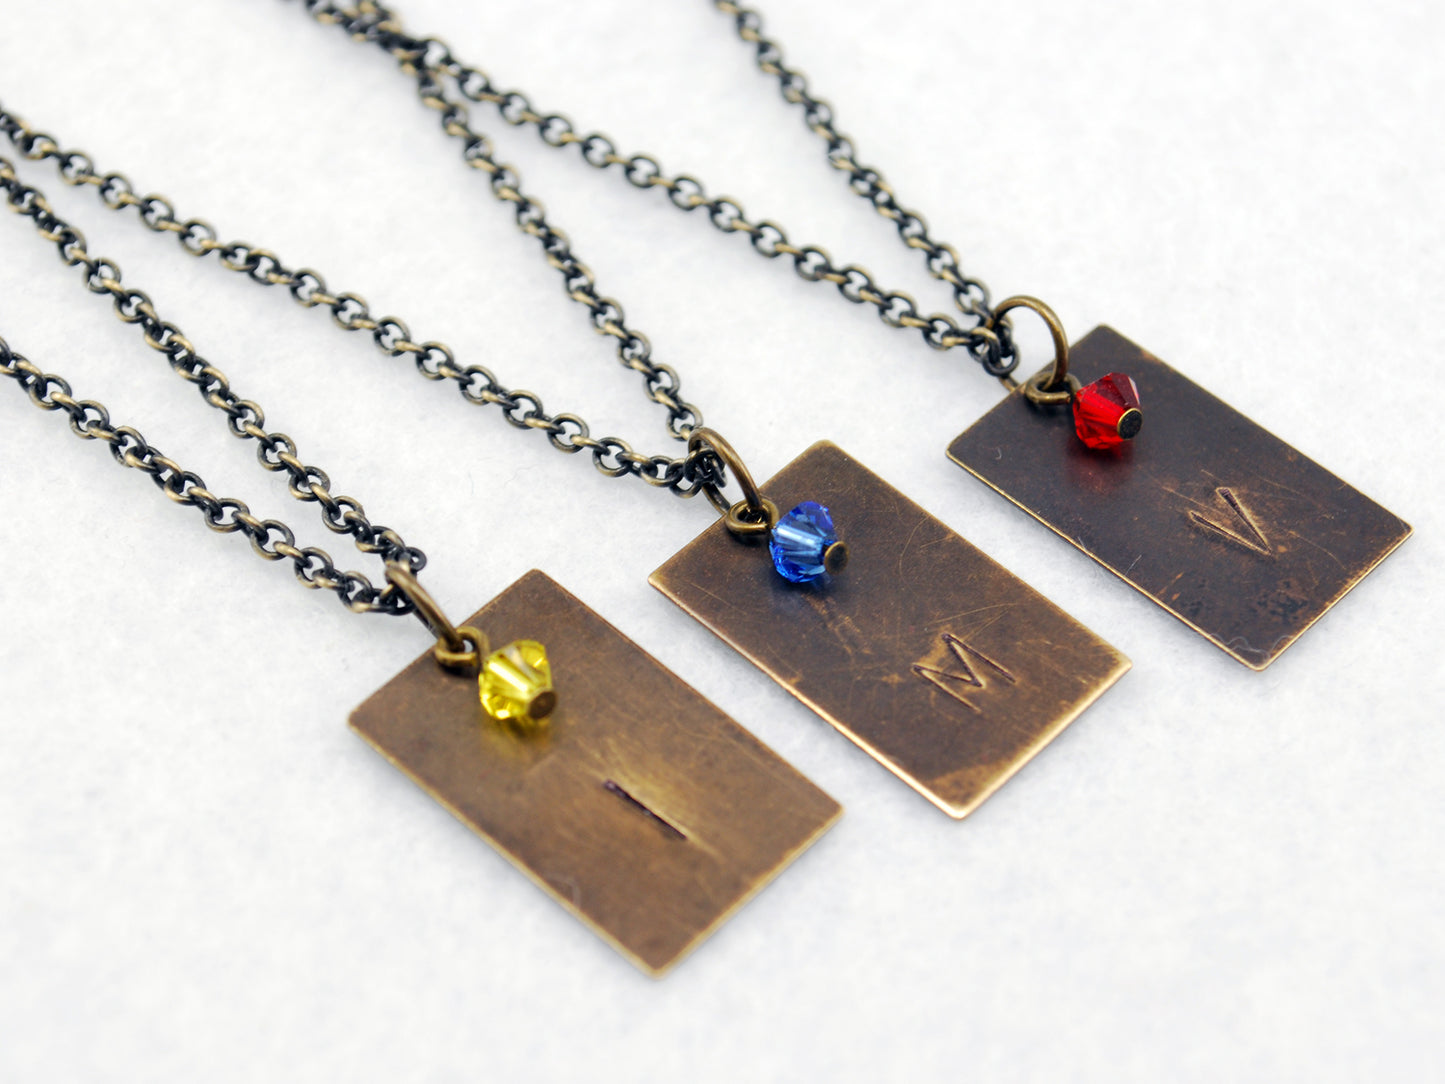 Mystic Necklace in Antique Brass - Trainer Teams